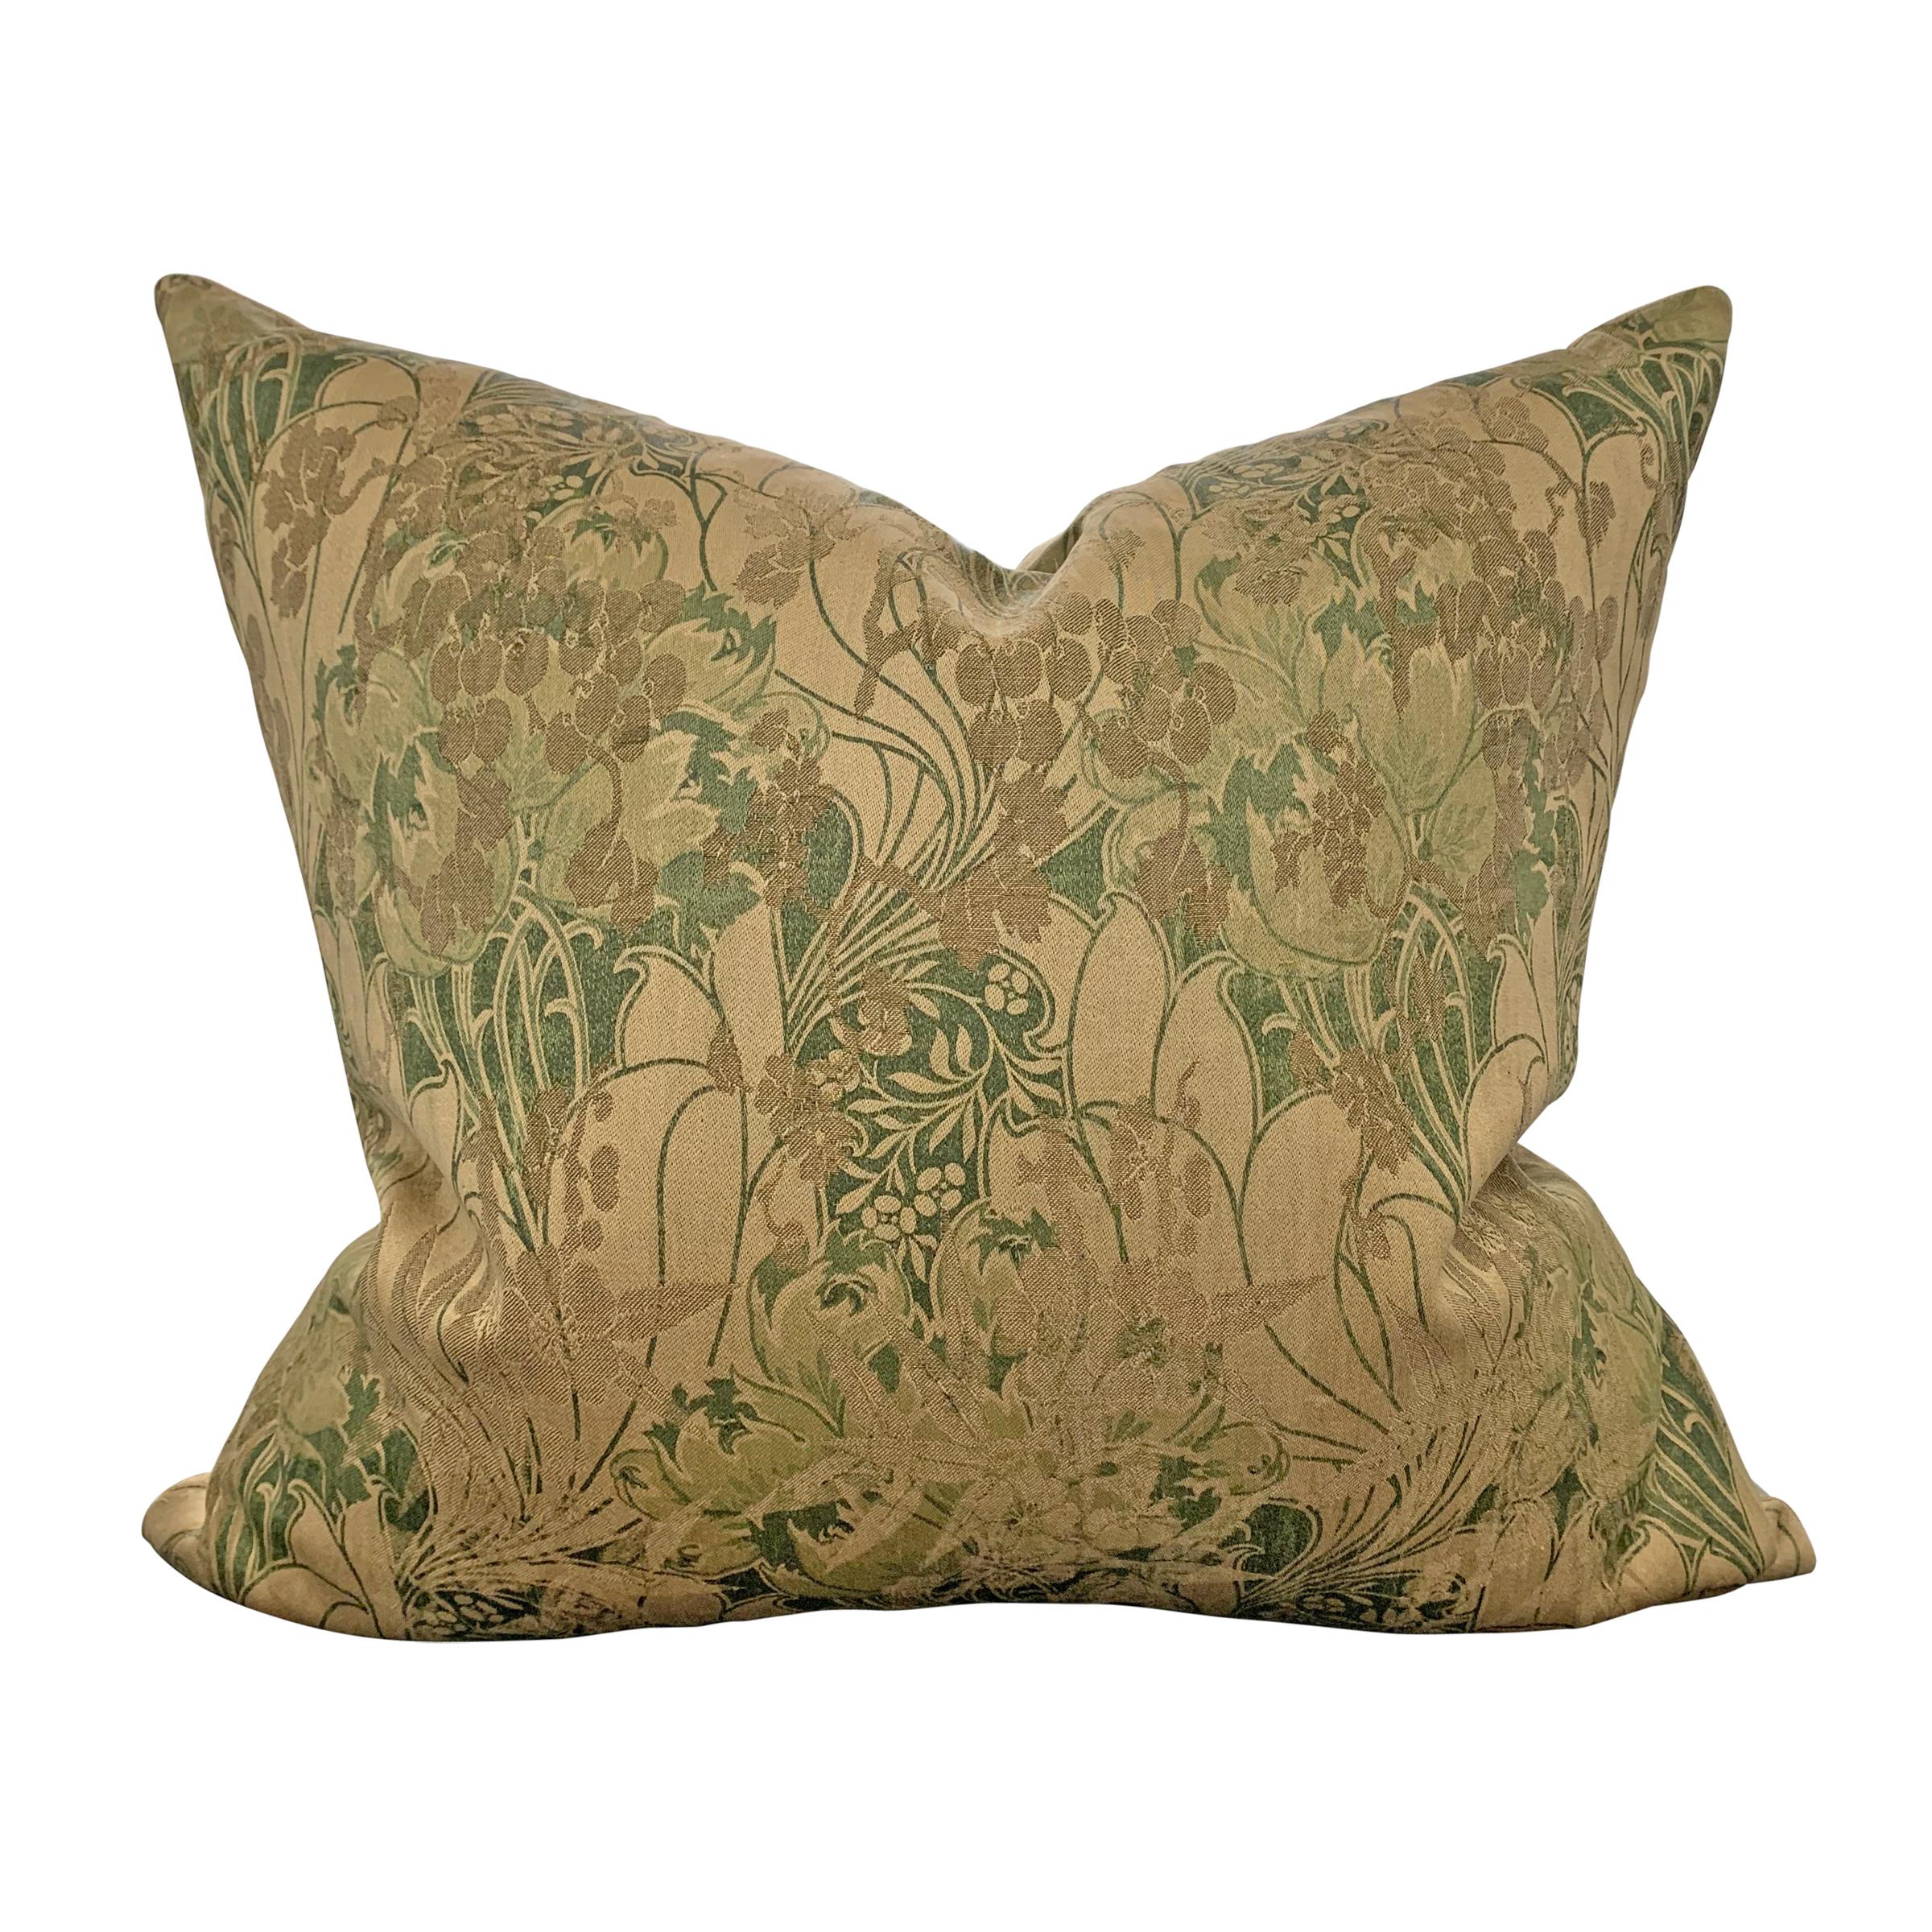 A pair of wonderful pillows made from late 19th-early 20th century English William Morris woven panels with elaborate large tulips and other flowers all woven in varying shades of green and olive. Backed with new silk panels, and filled with down.